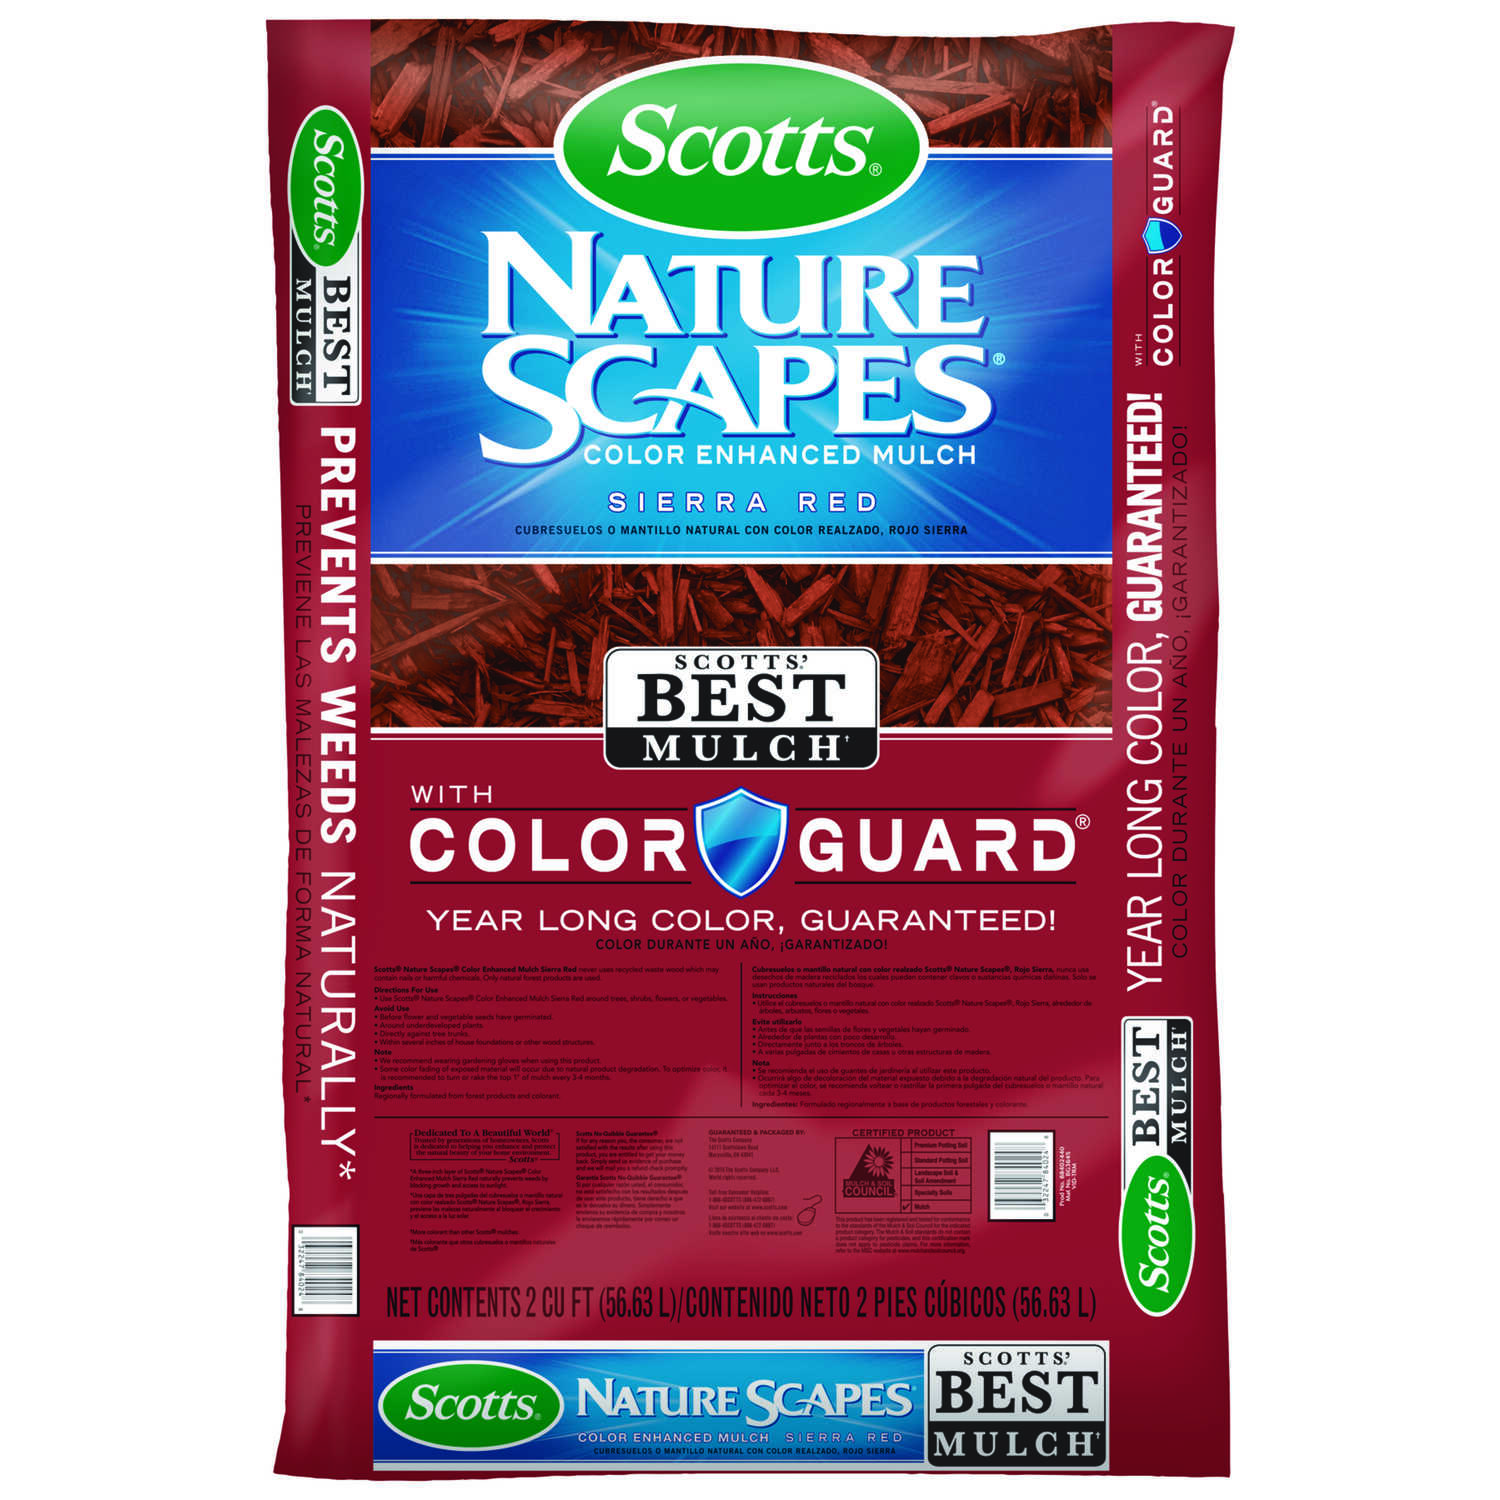 Scotts Nature Scapes Sierra Red Bark ColorEnhanced Mulch